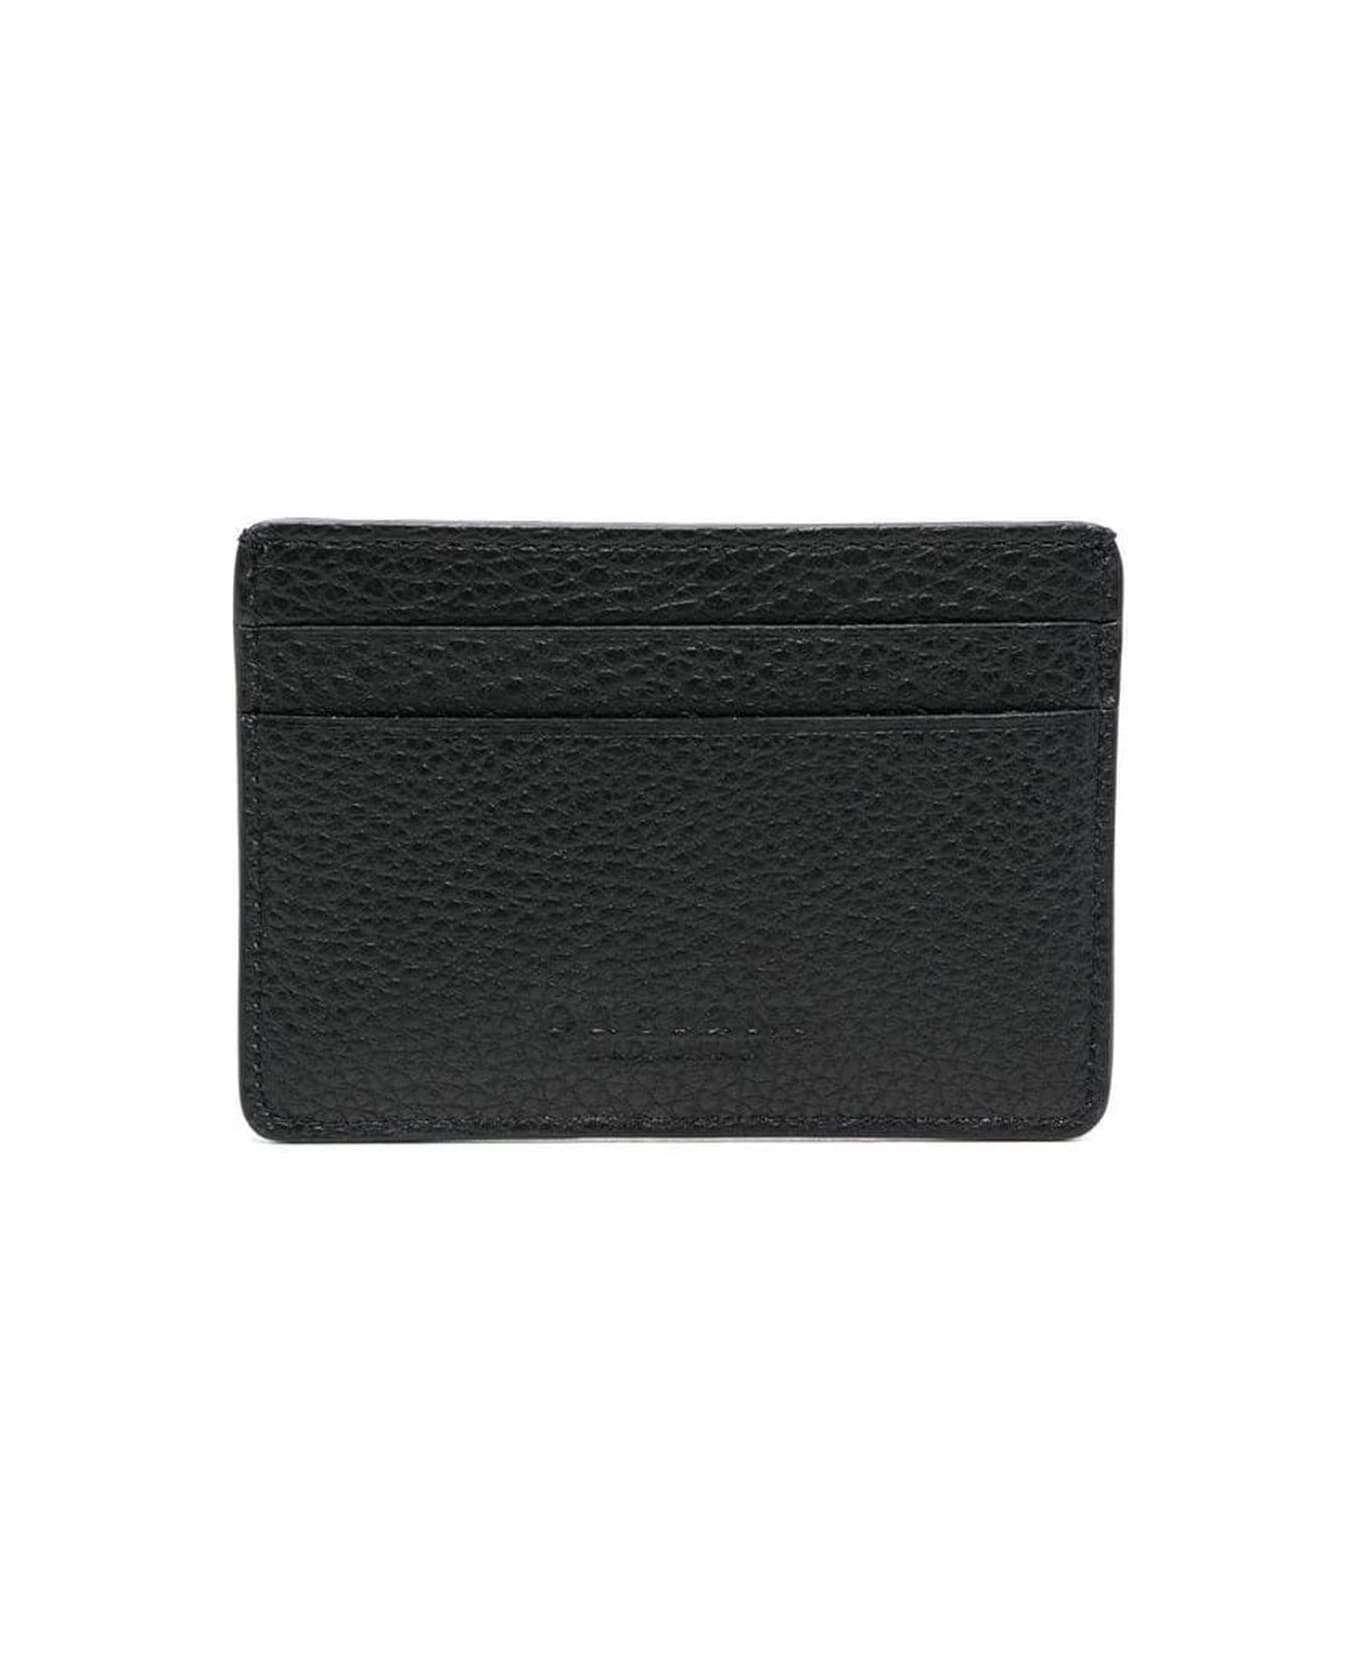 Orciani Micron Leather Card Holder - Black